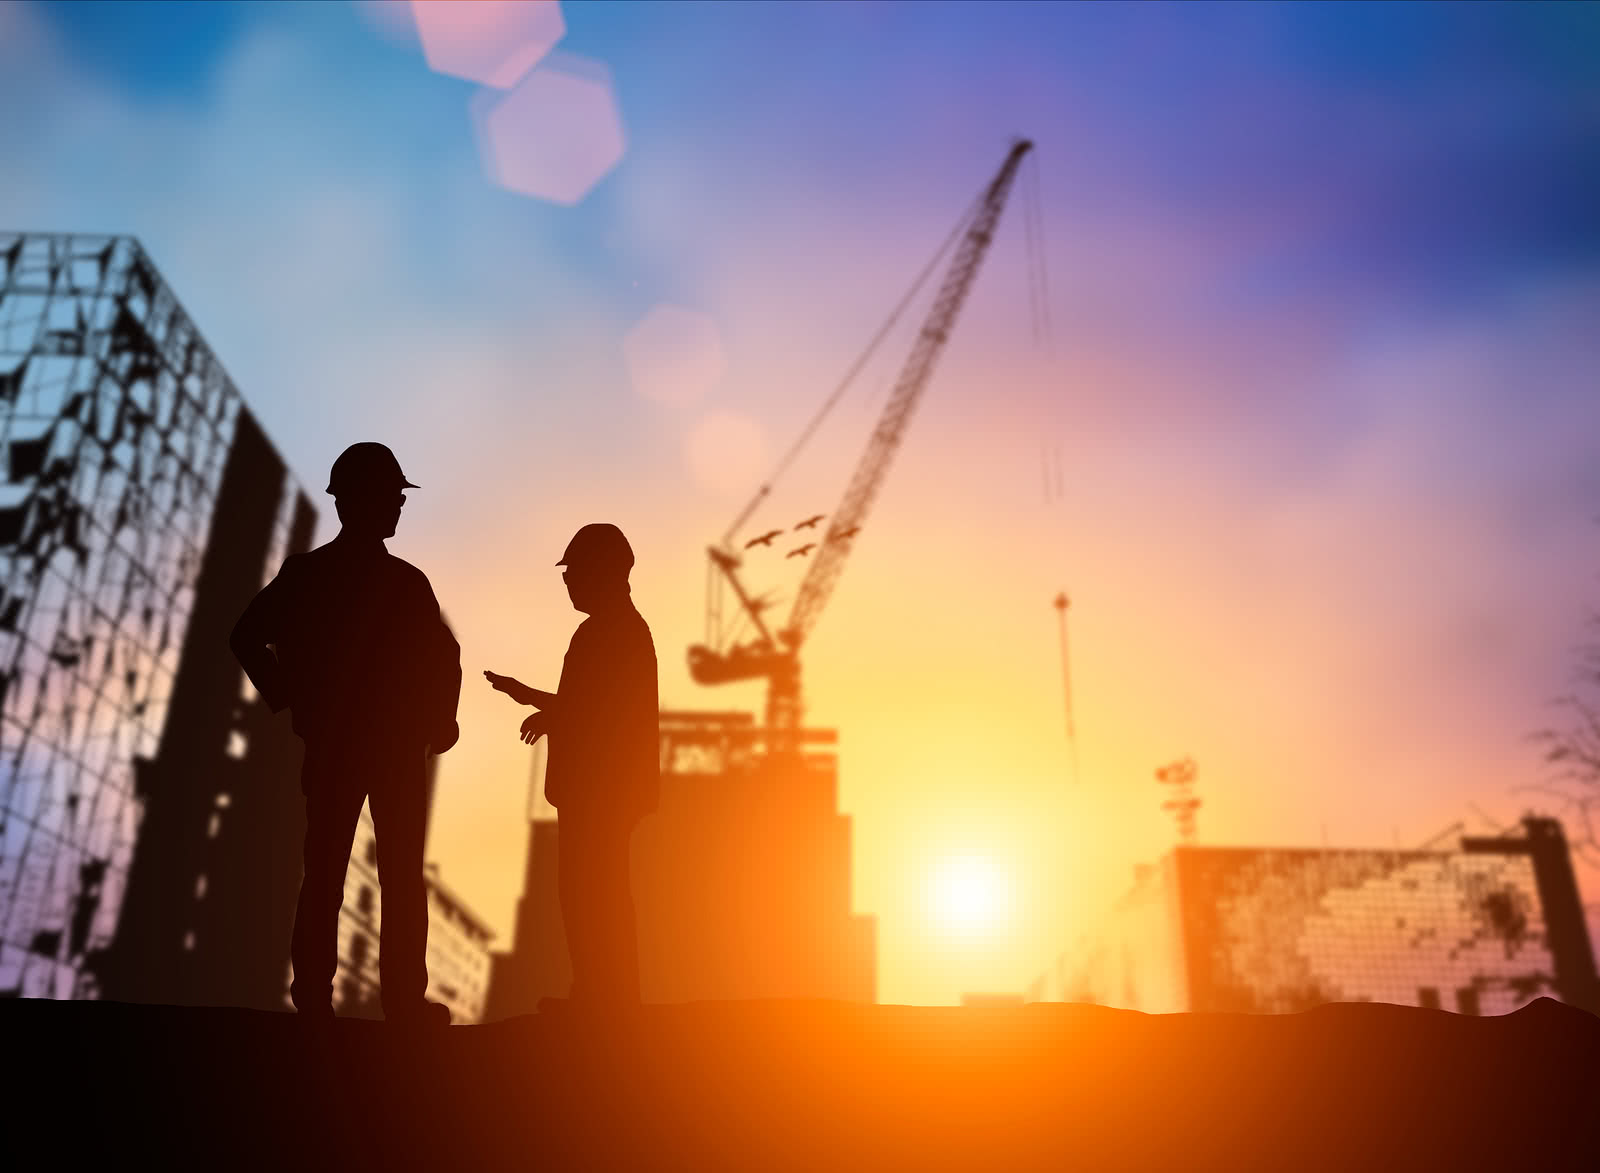 Two construction workers stand in front of a crane with sunset background